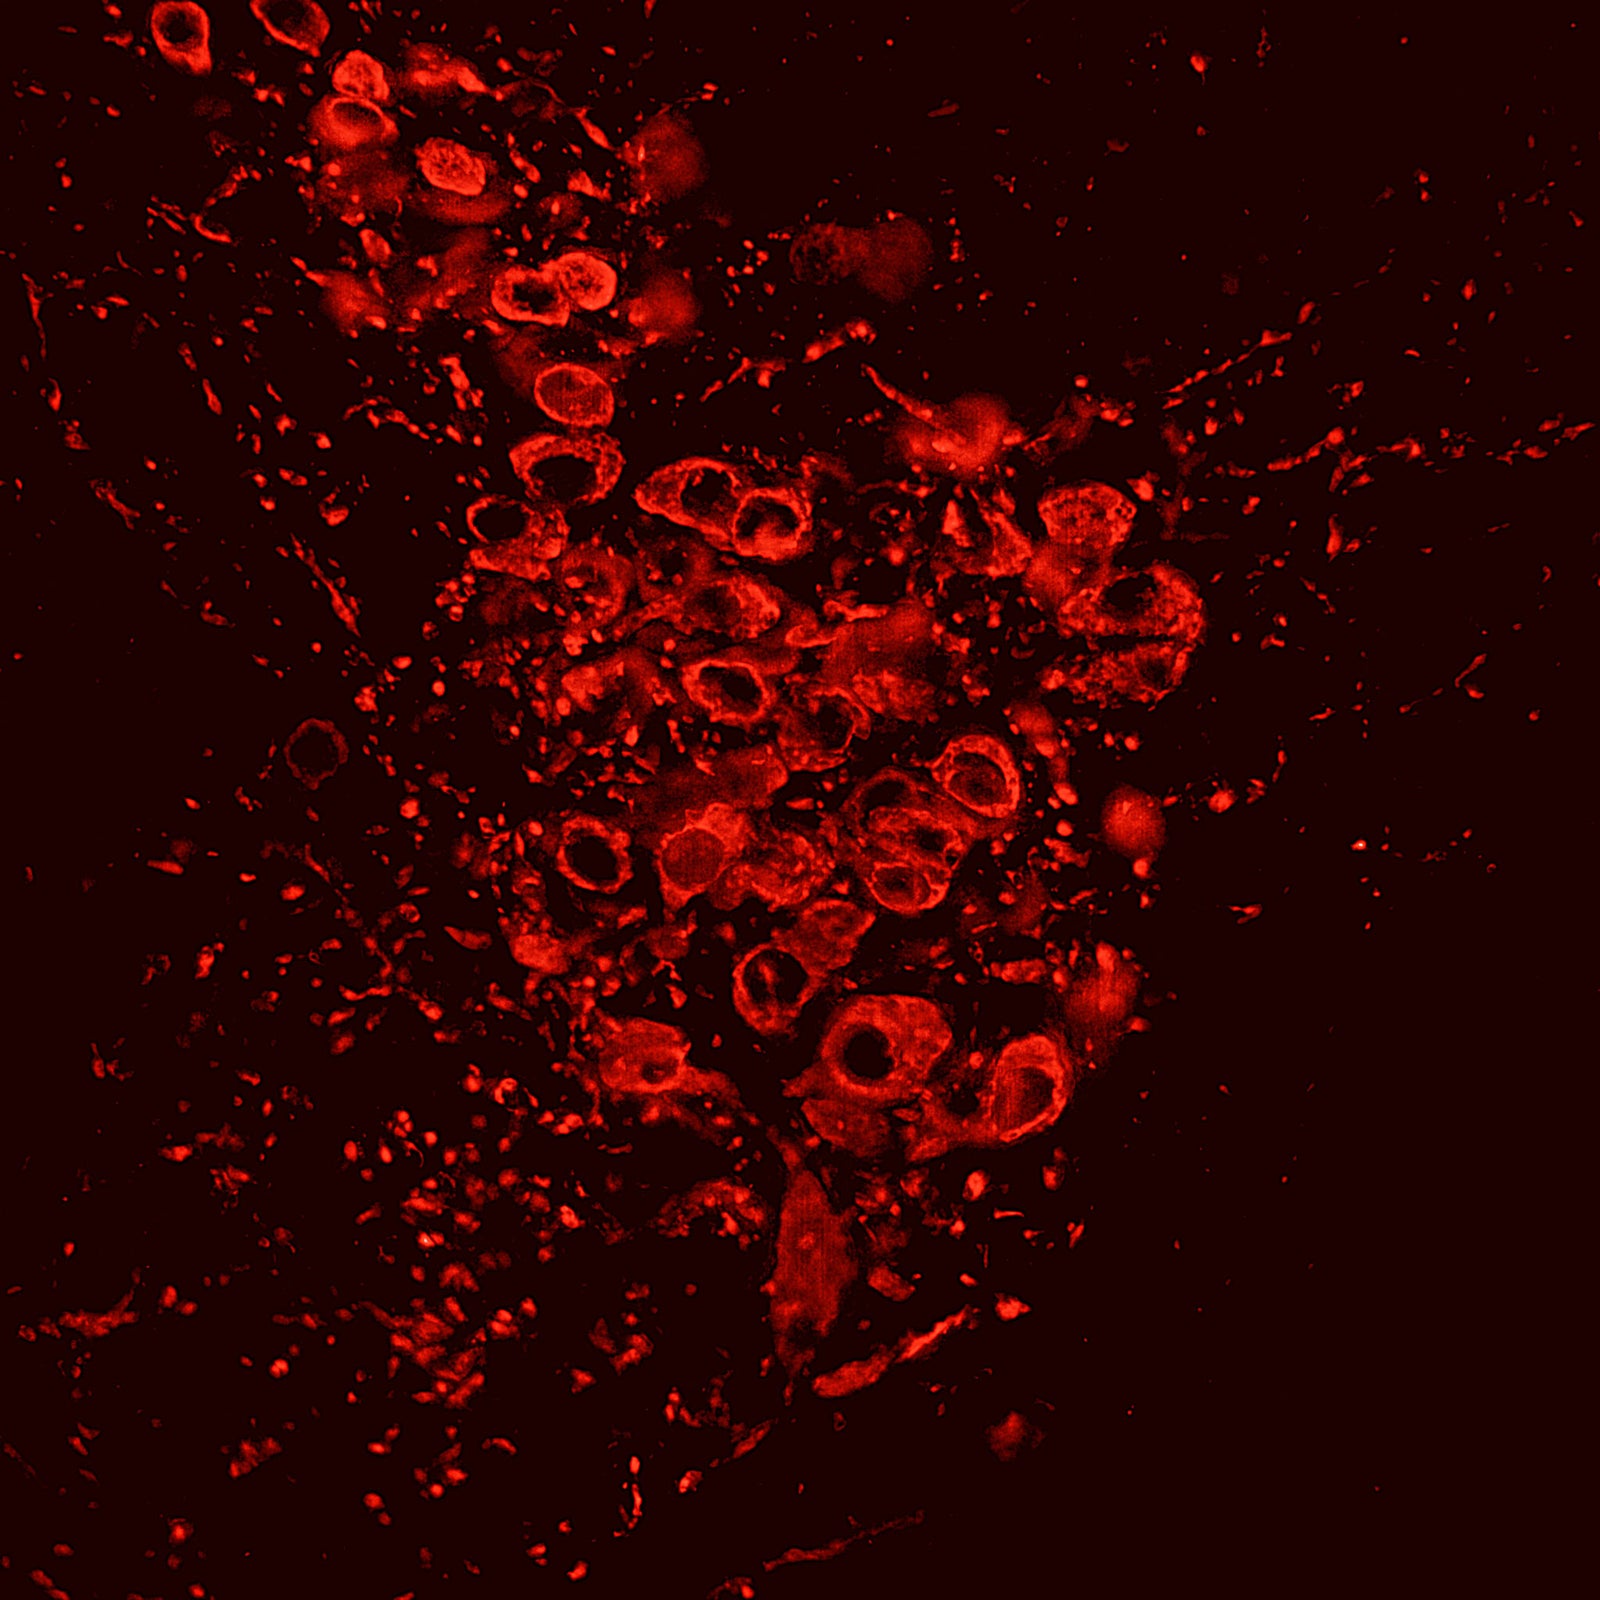 Immunostaining of free-floating sections of mouse locus ceruleus (brainstem) labeling tyrosine hydroxylase (Cat no 2027-THSHP, red, 1:2000) The mouse was transcardially perfused with 20 mL of PBS containing 0.1% procaine and 100 U/mL heparin followed by 20 mL of 4% paraformaldehyde (PFA) in PBS. The dissected brains were kept in fixative at 4 °C overnight. The image was kindly provided by Eugene Dimitrov, Department of Physiology and Biophysics, Rosalind Franklin University.